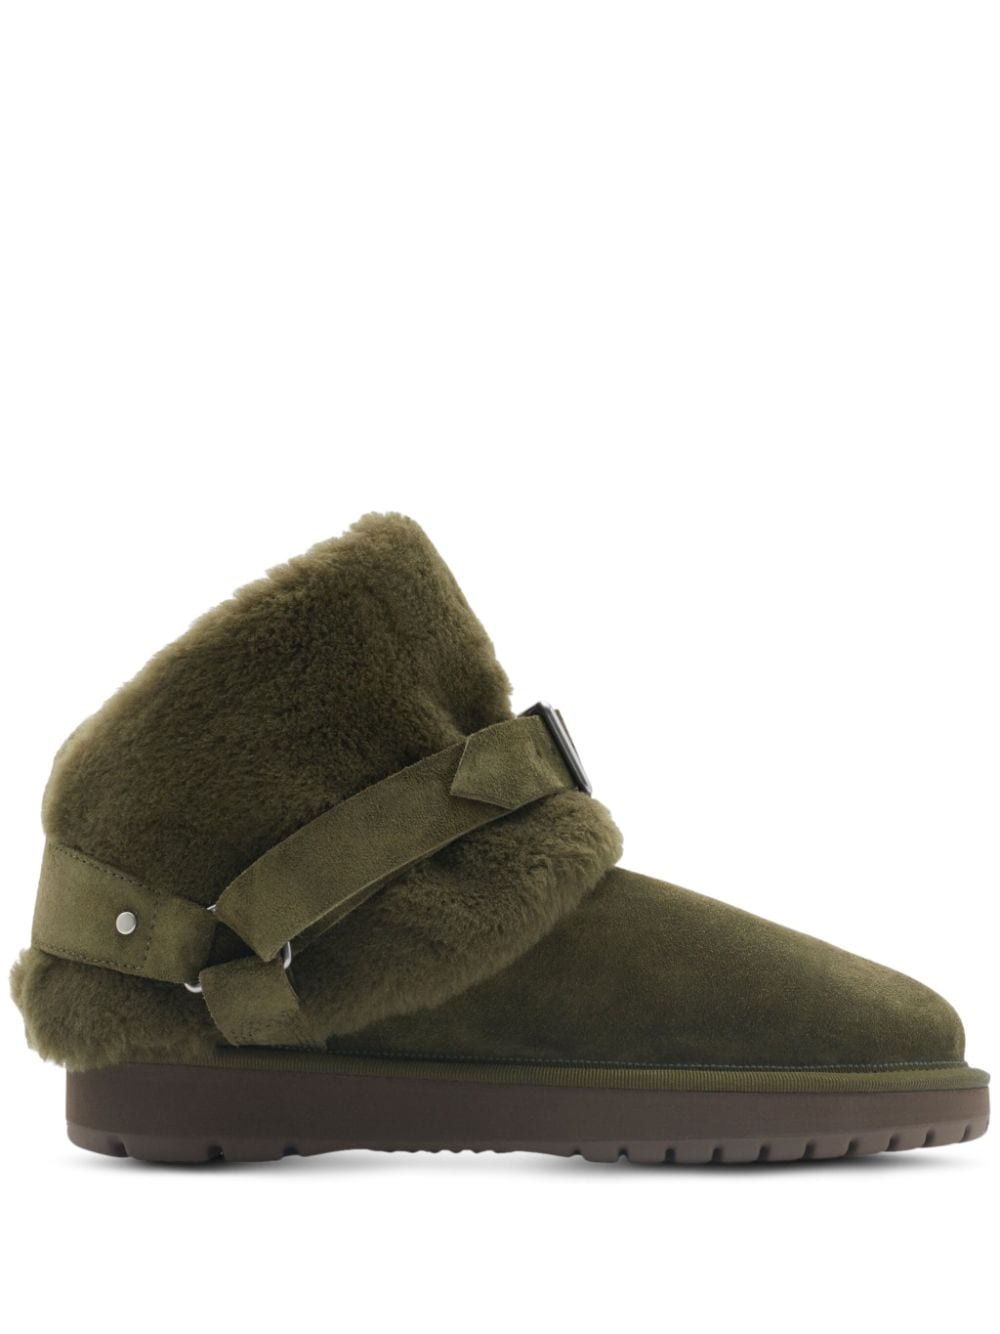 Burberry Chubby leather boots - Green von Burberry